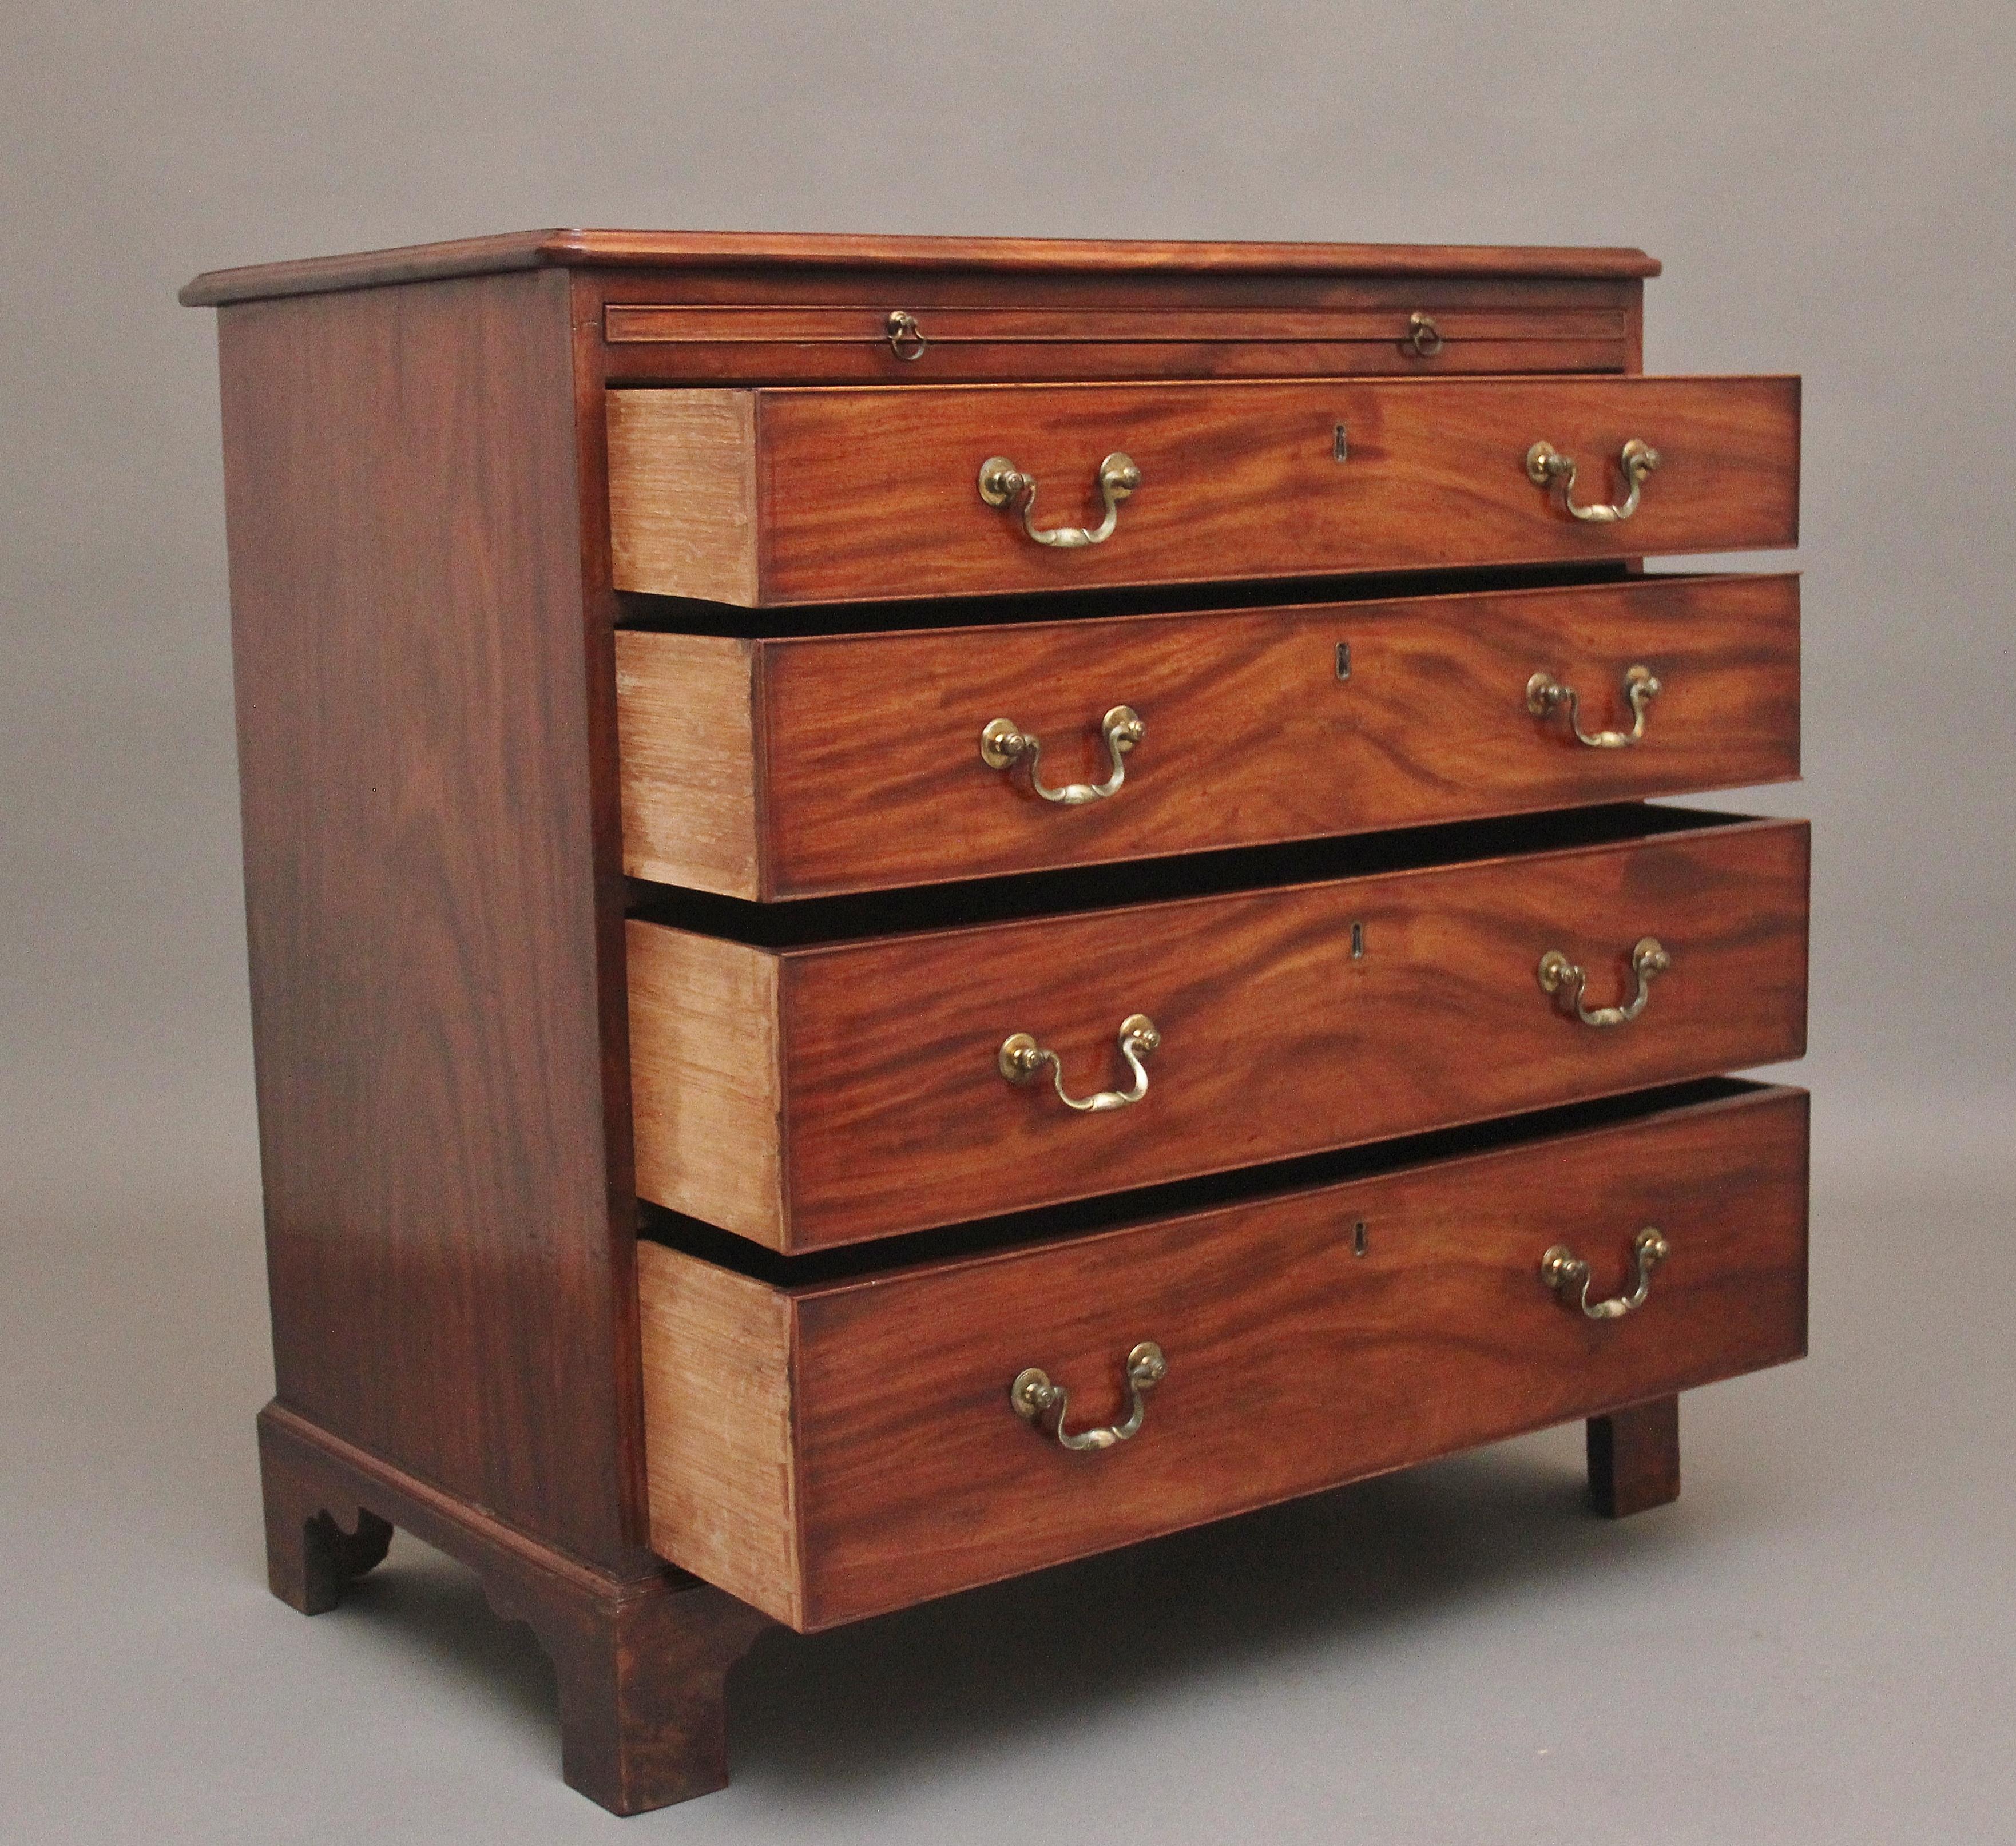 Late 18th Century Superb quality 18th Century mahogany chest of drawers